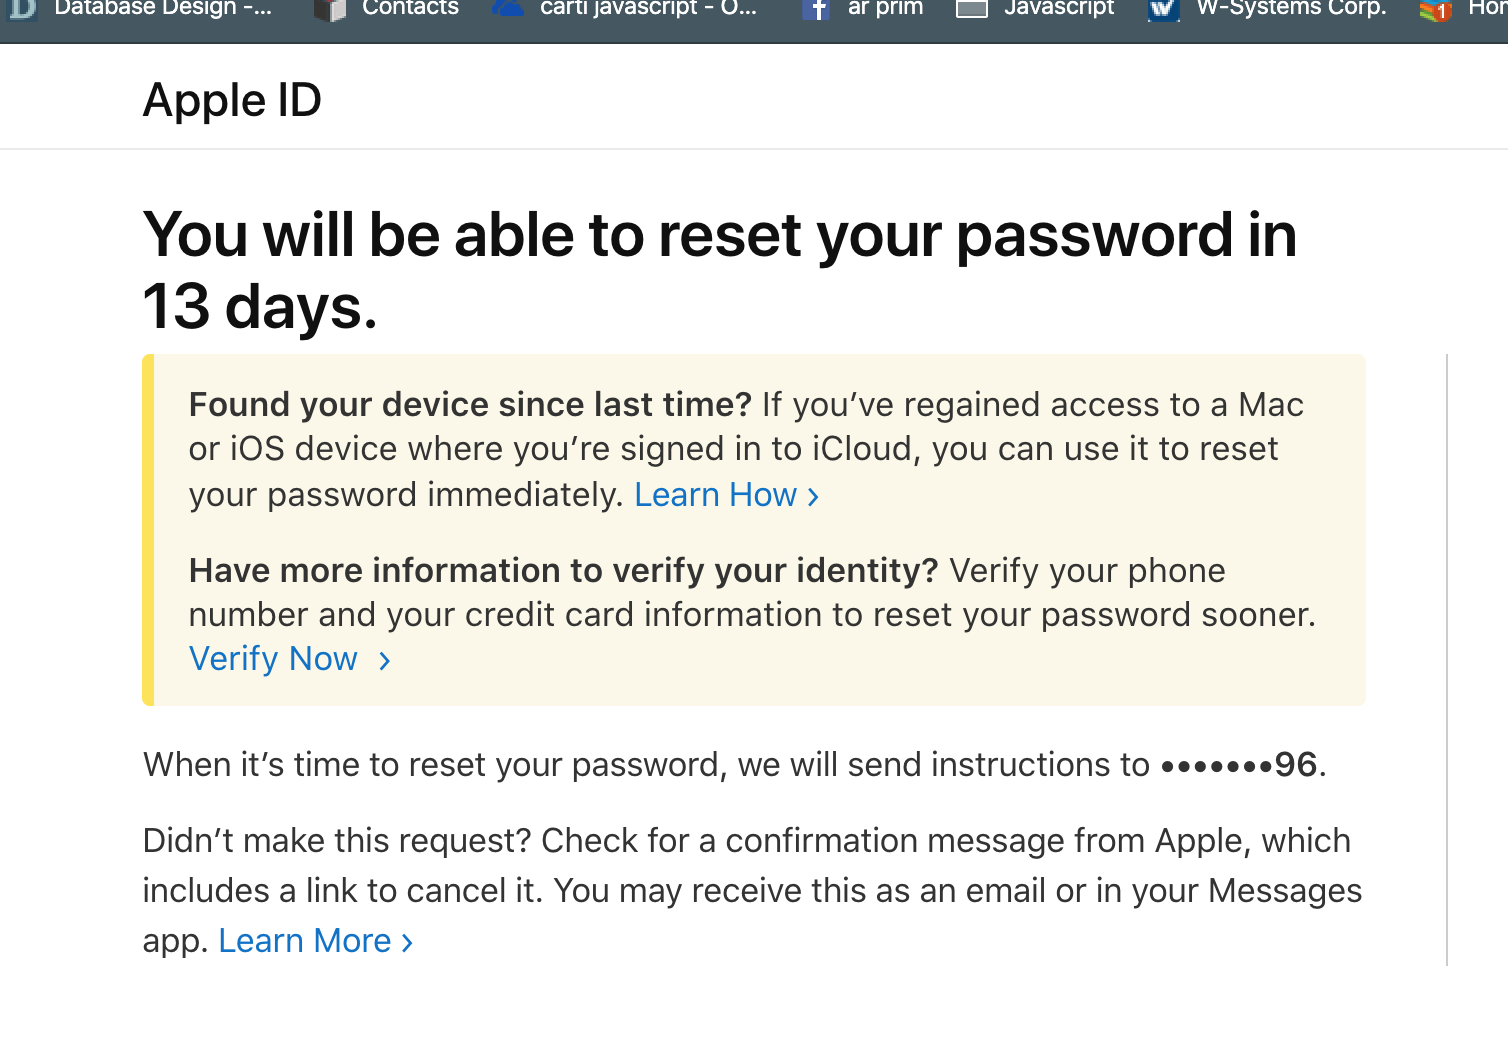 Recovery password for icloud email/ apple - Apple Community